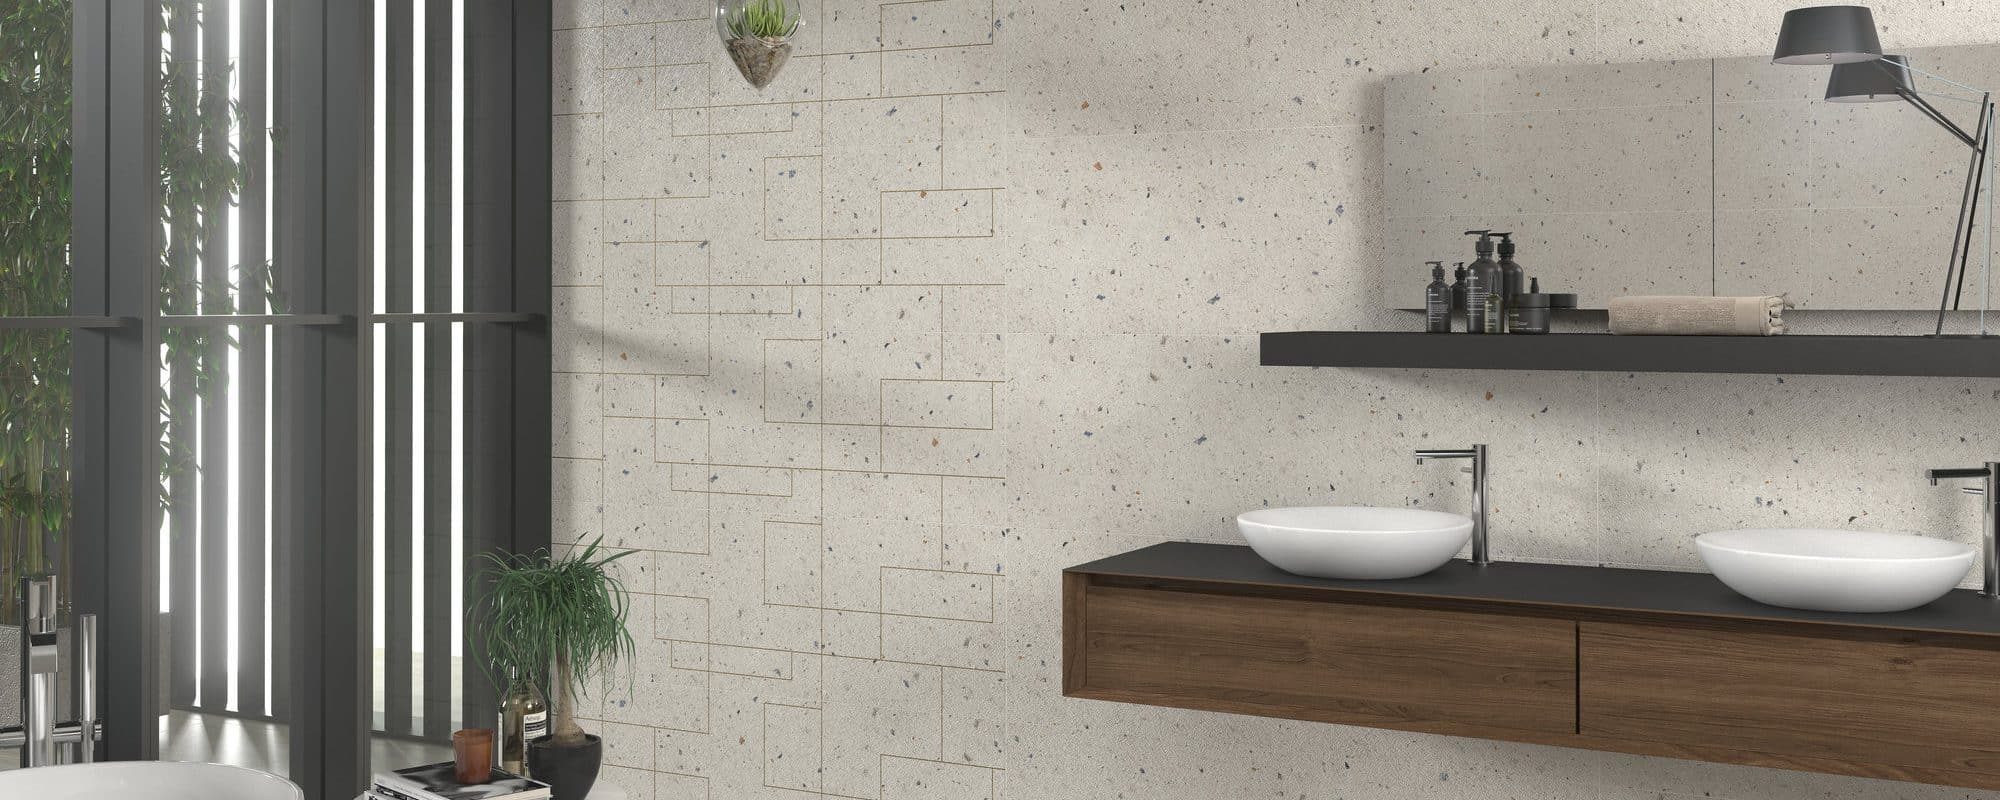 RE-USE-porcelain materials Wall tiles with Textile effect slider